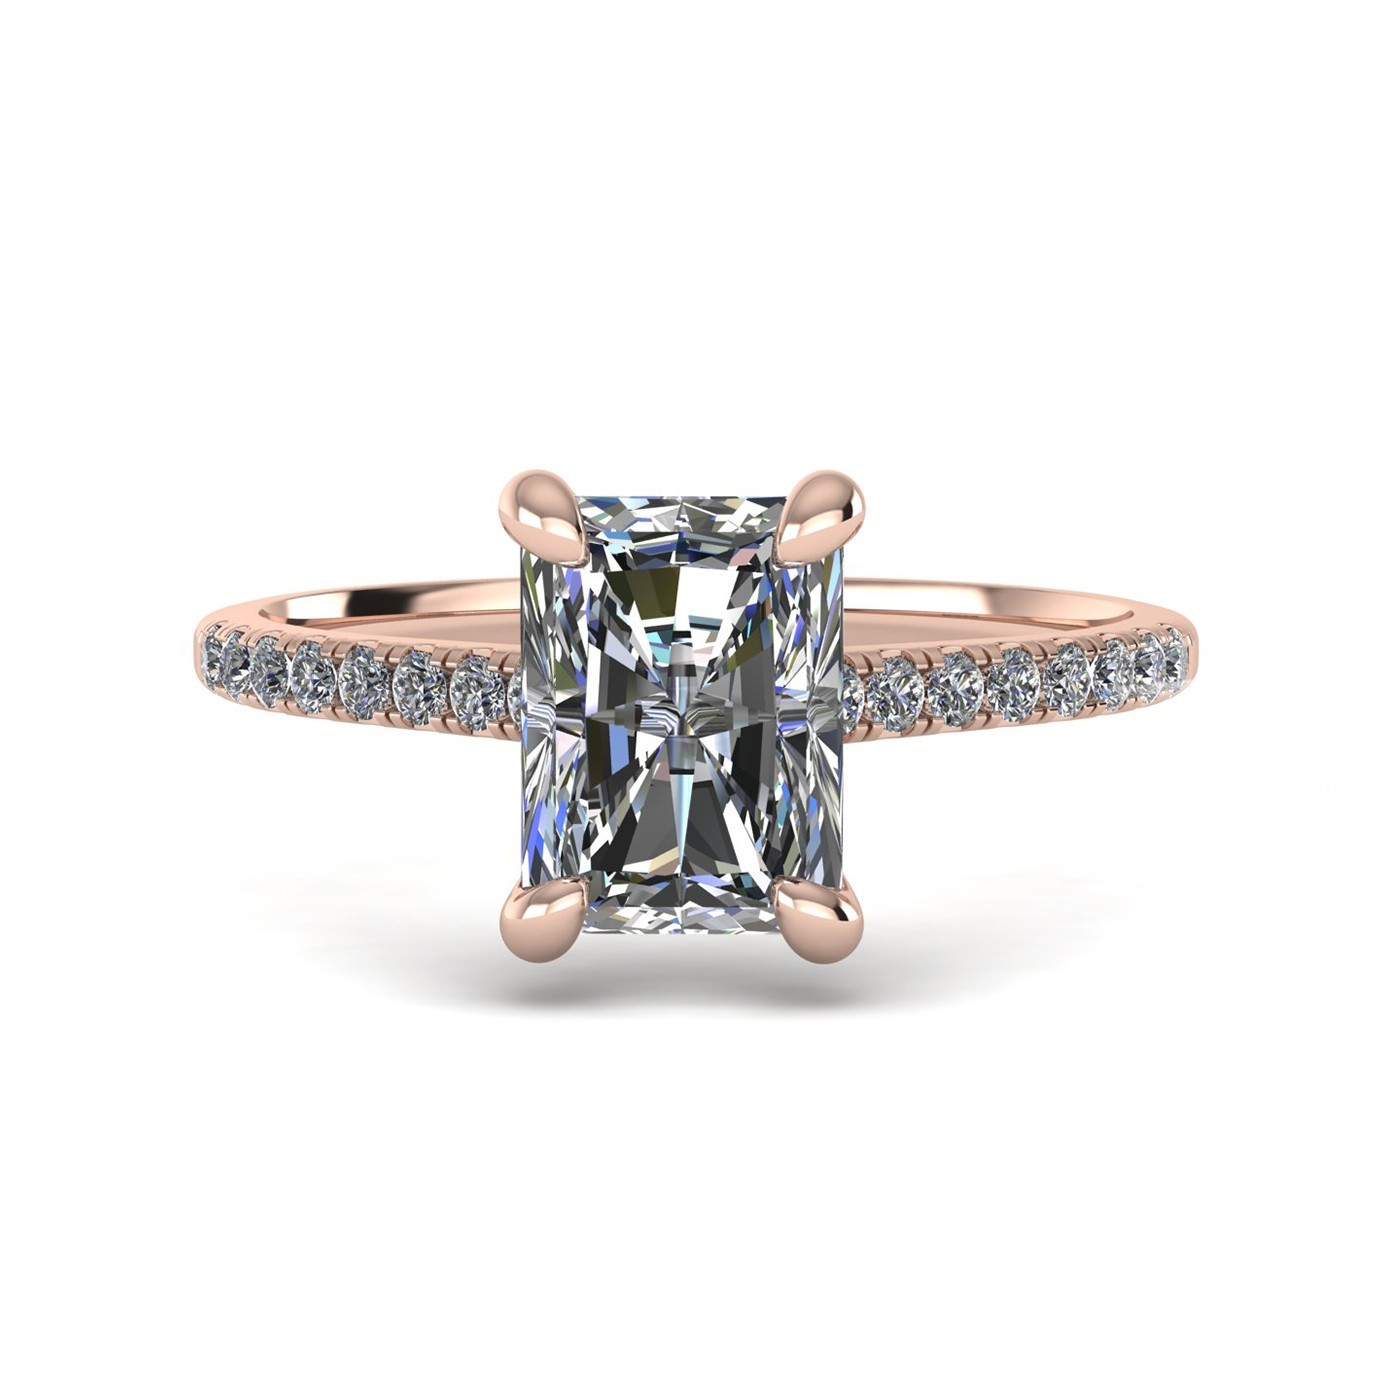 18k rose gold  1,50 ct 4 prongs radiant cut diamond engagement ring with whisper thin pavÉ set band Photos & images